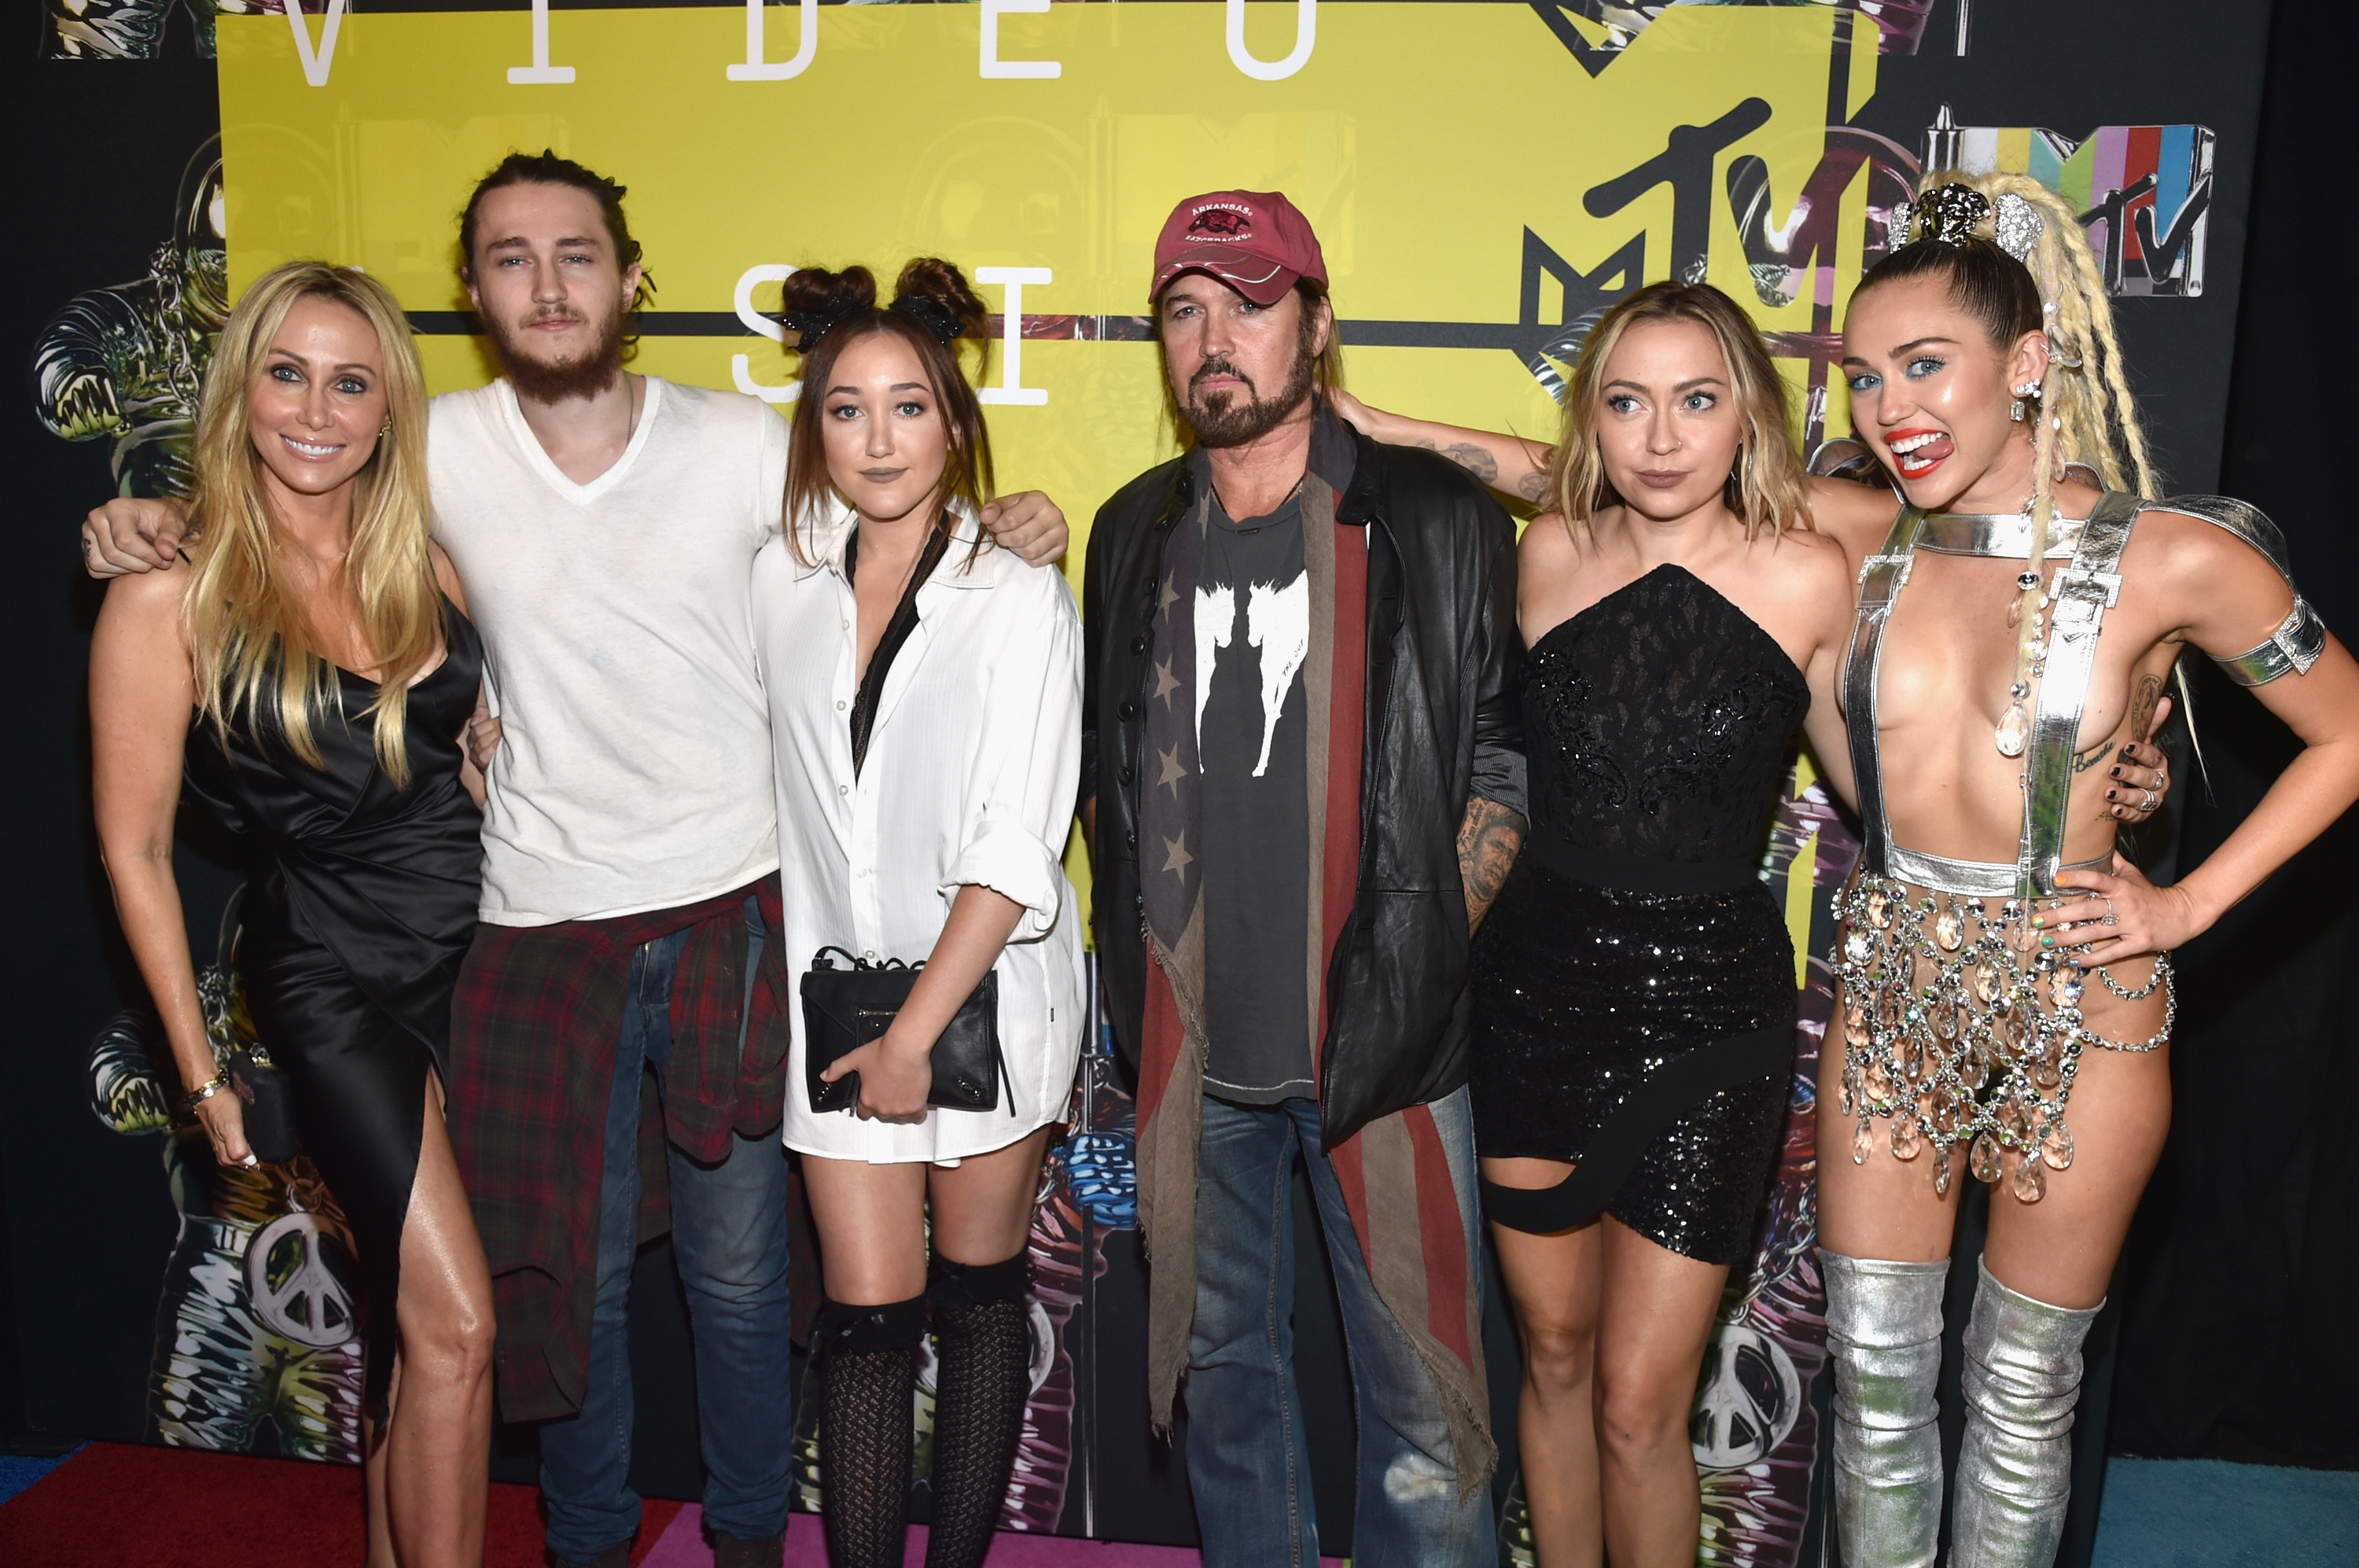 The Cyrus family standing together on the red carpet